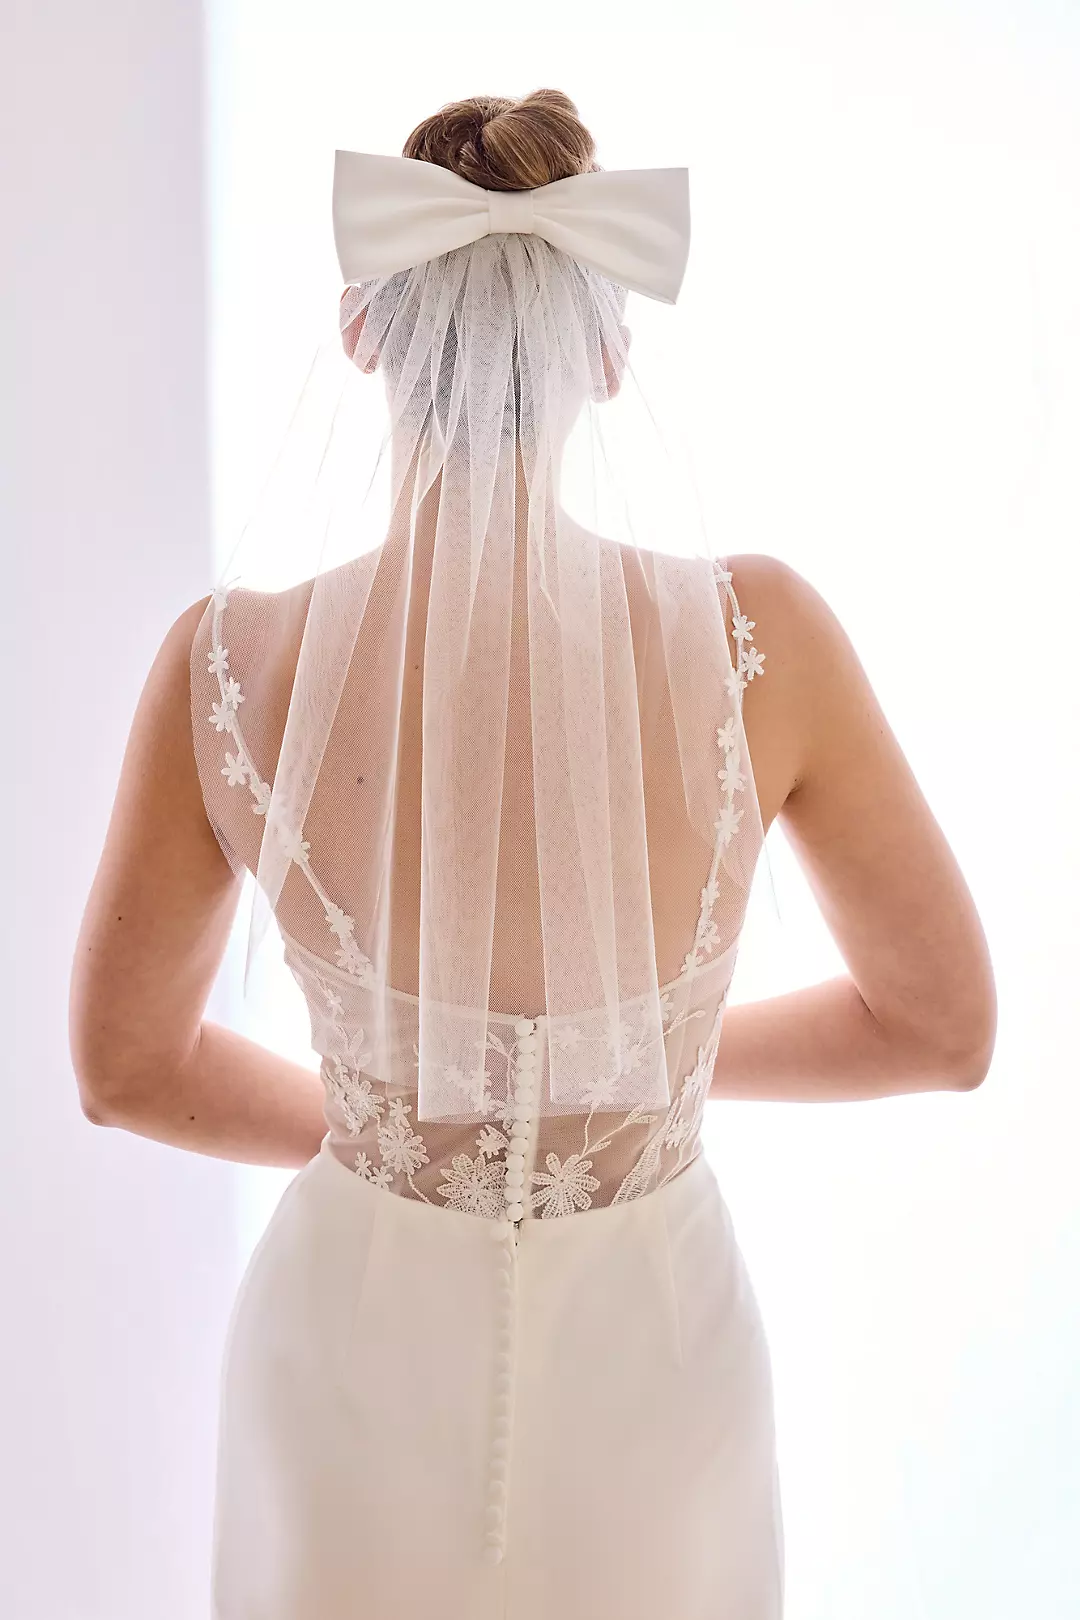 Tulle Veil with Satin Bow Image